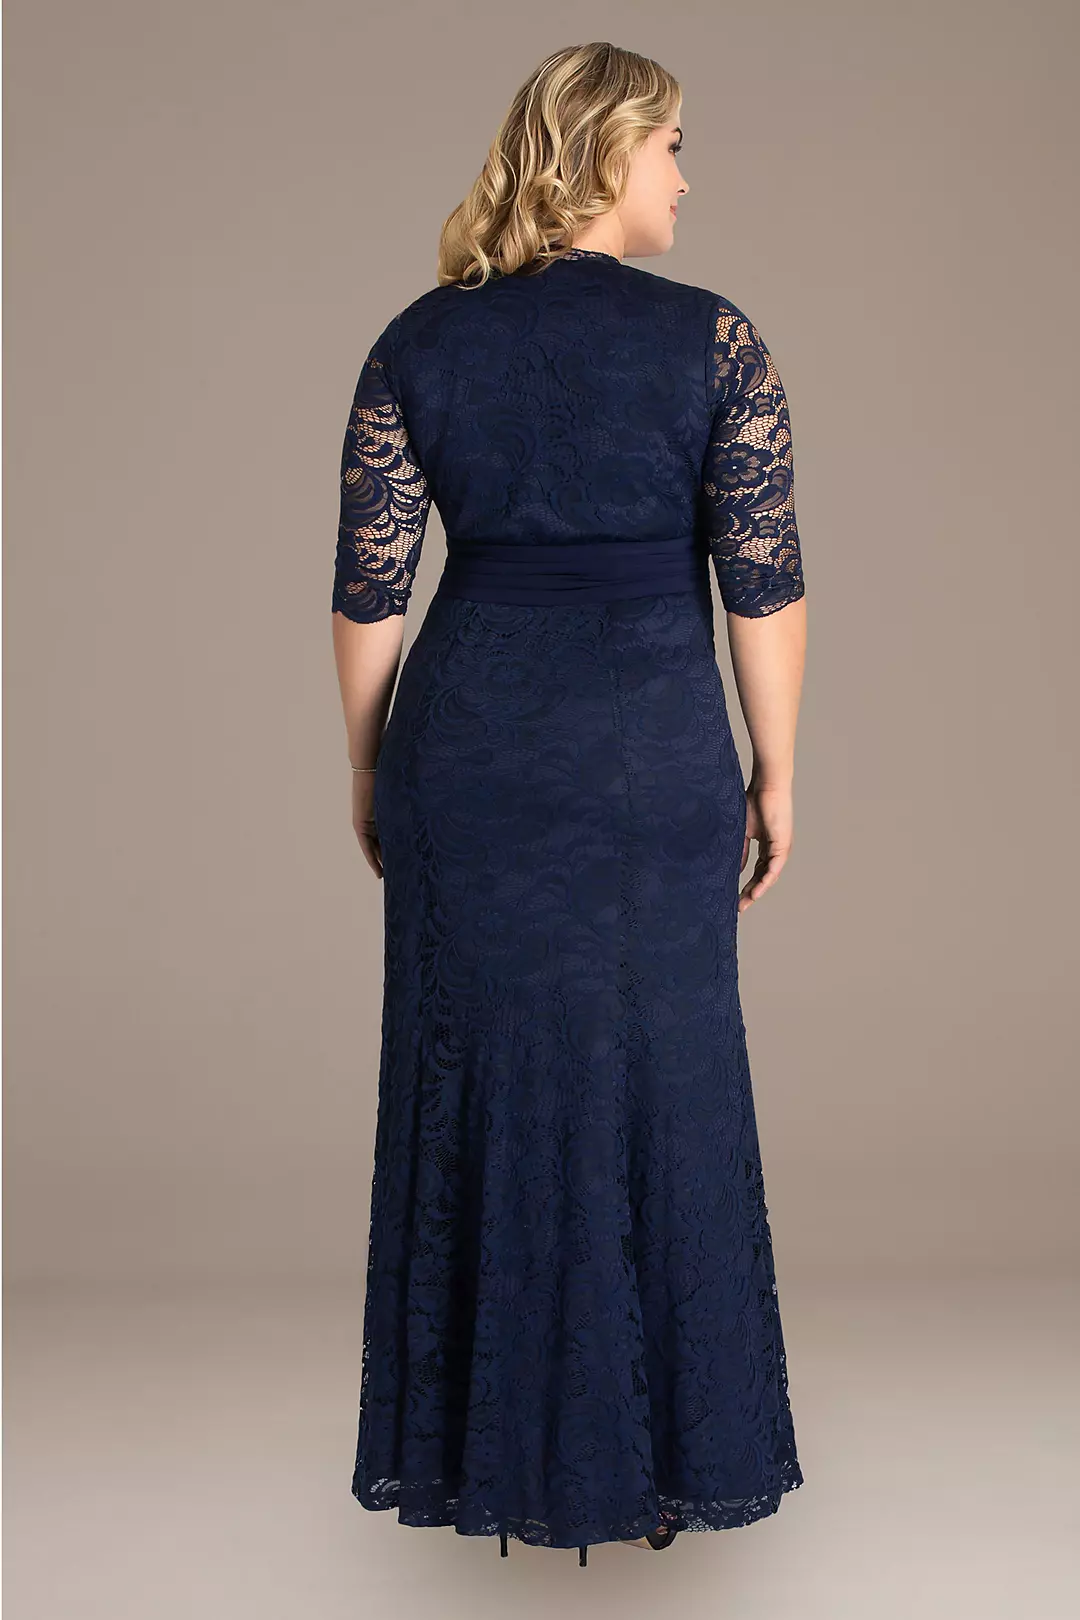 Screen Siren V-Neck Lace Plus Size Gown Image 2